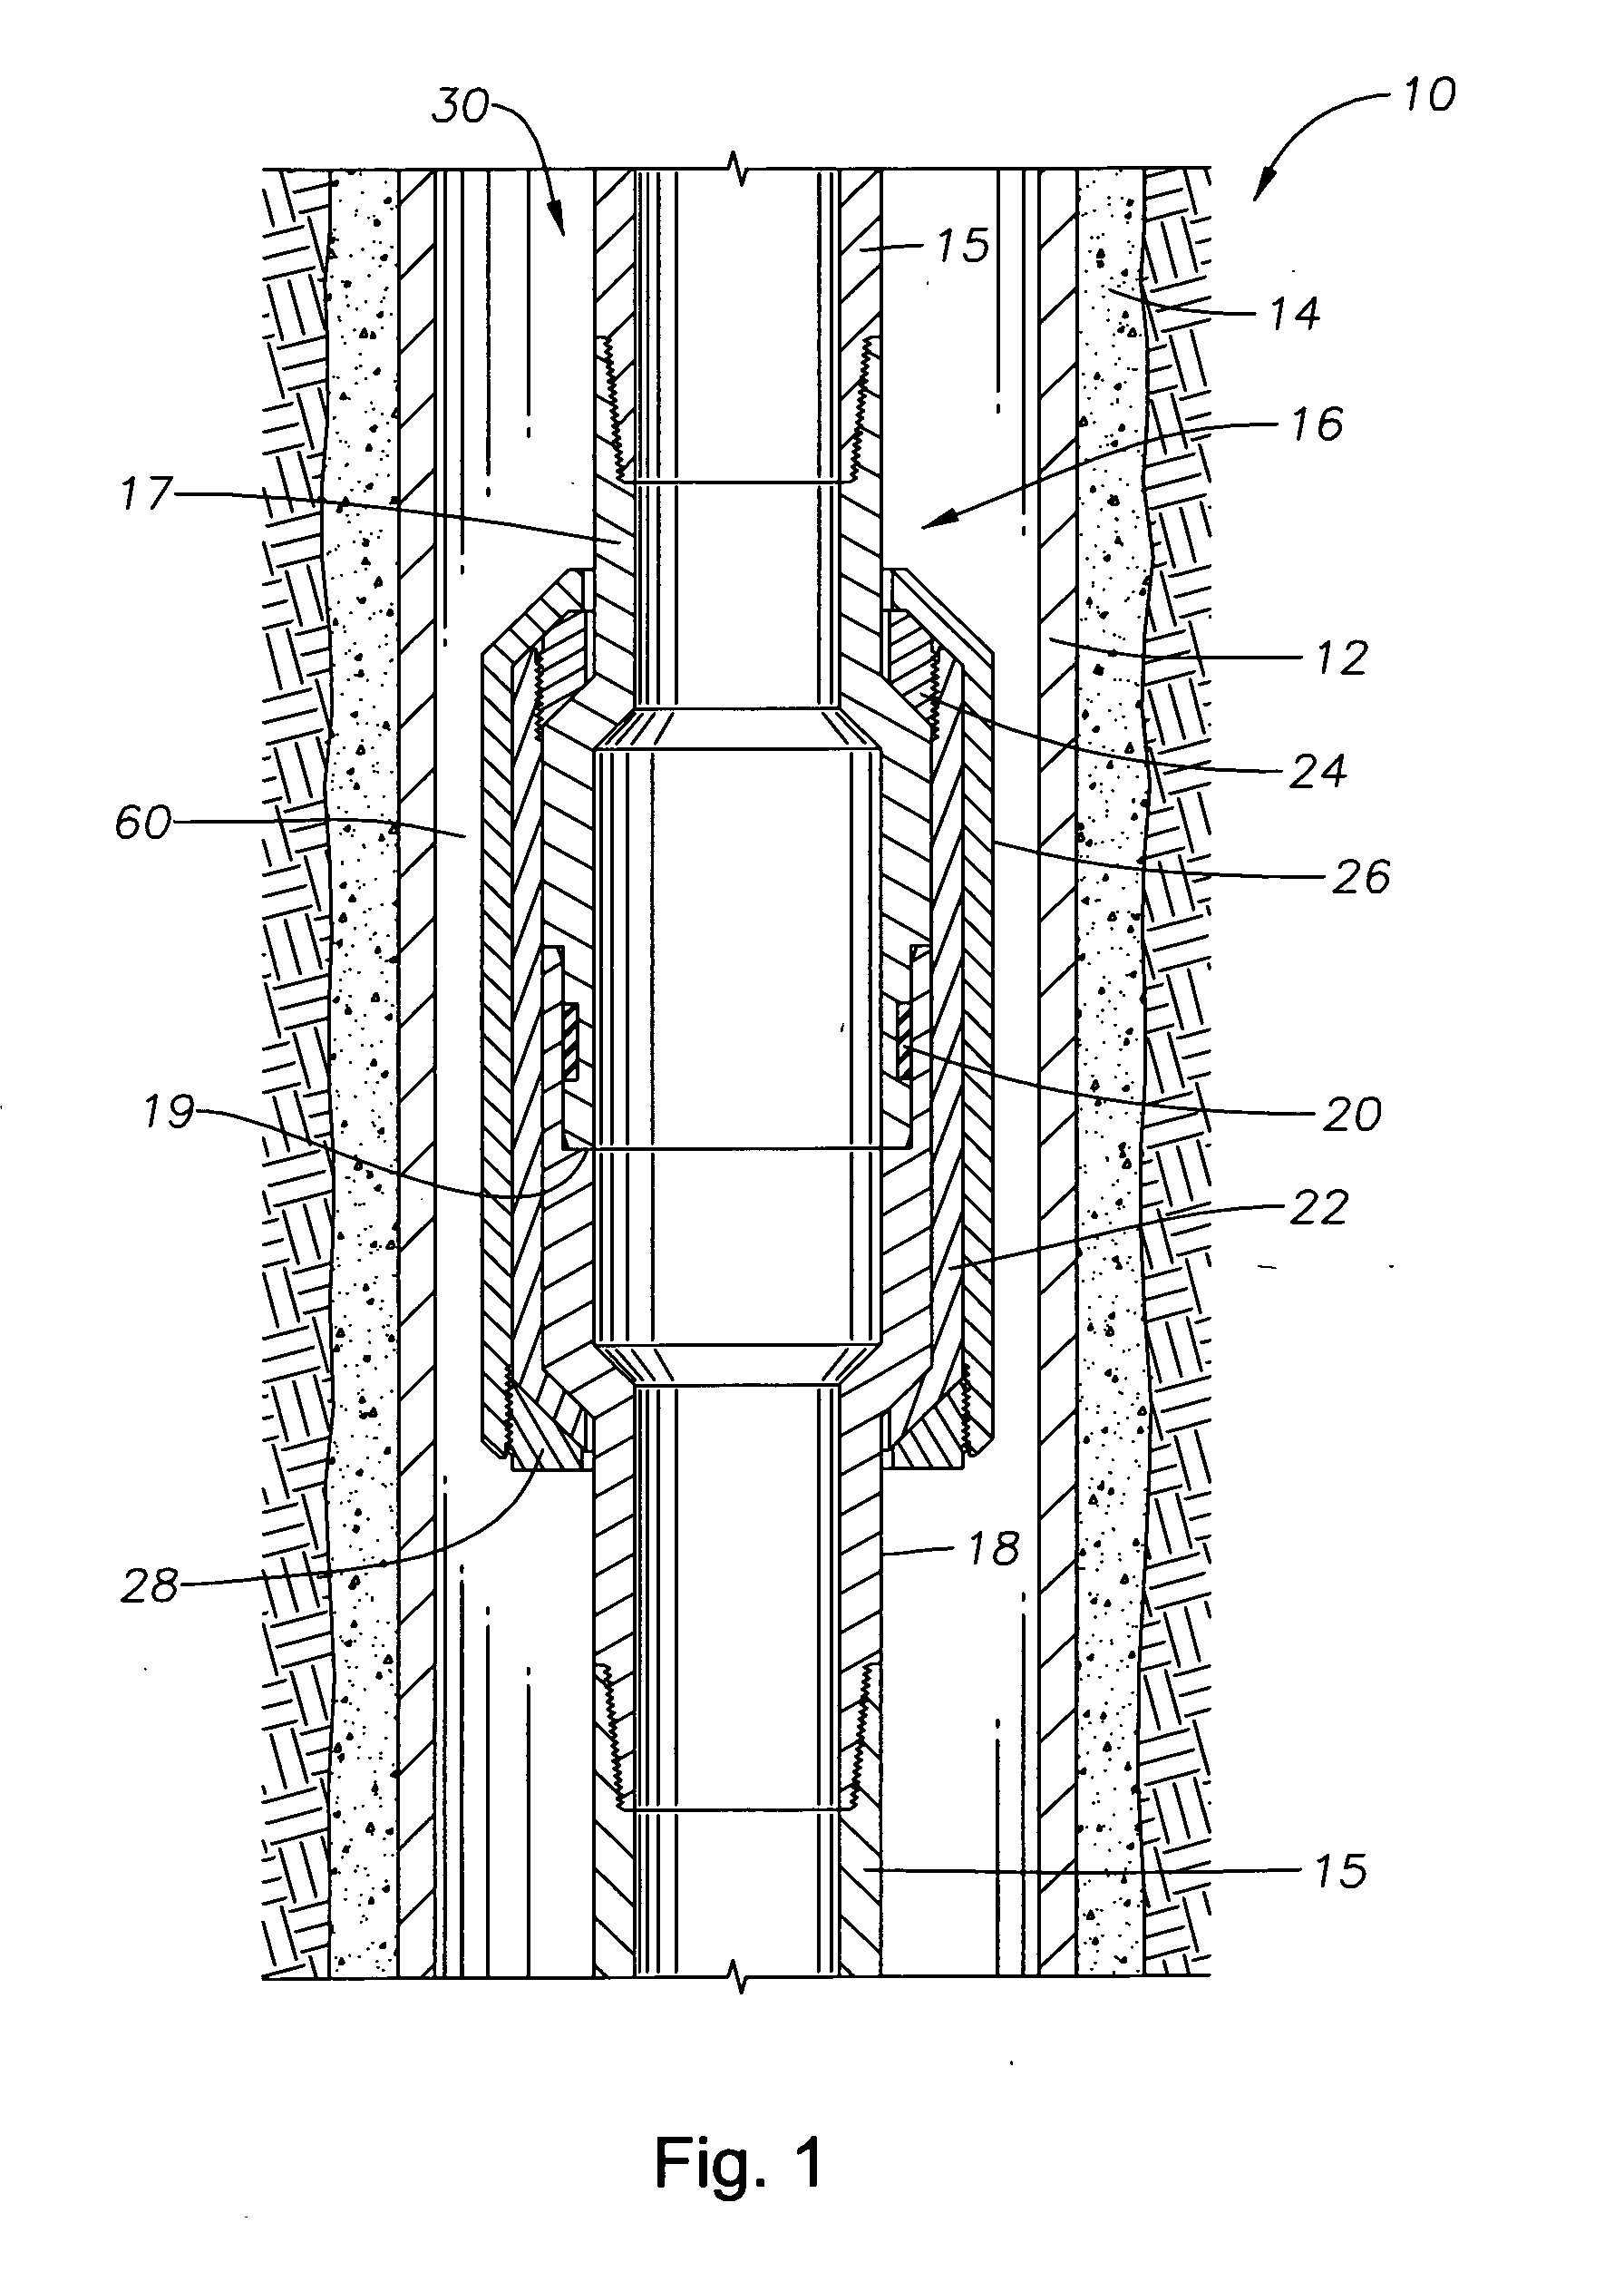 Laminate pressure containing body for a well tool